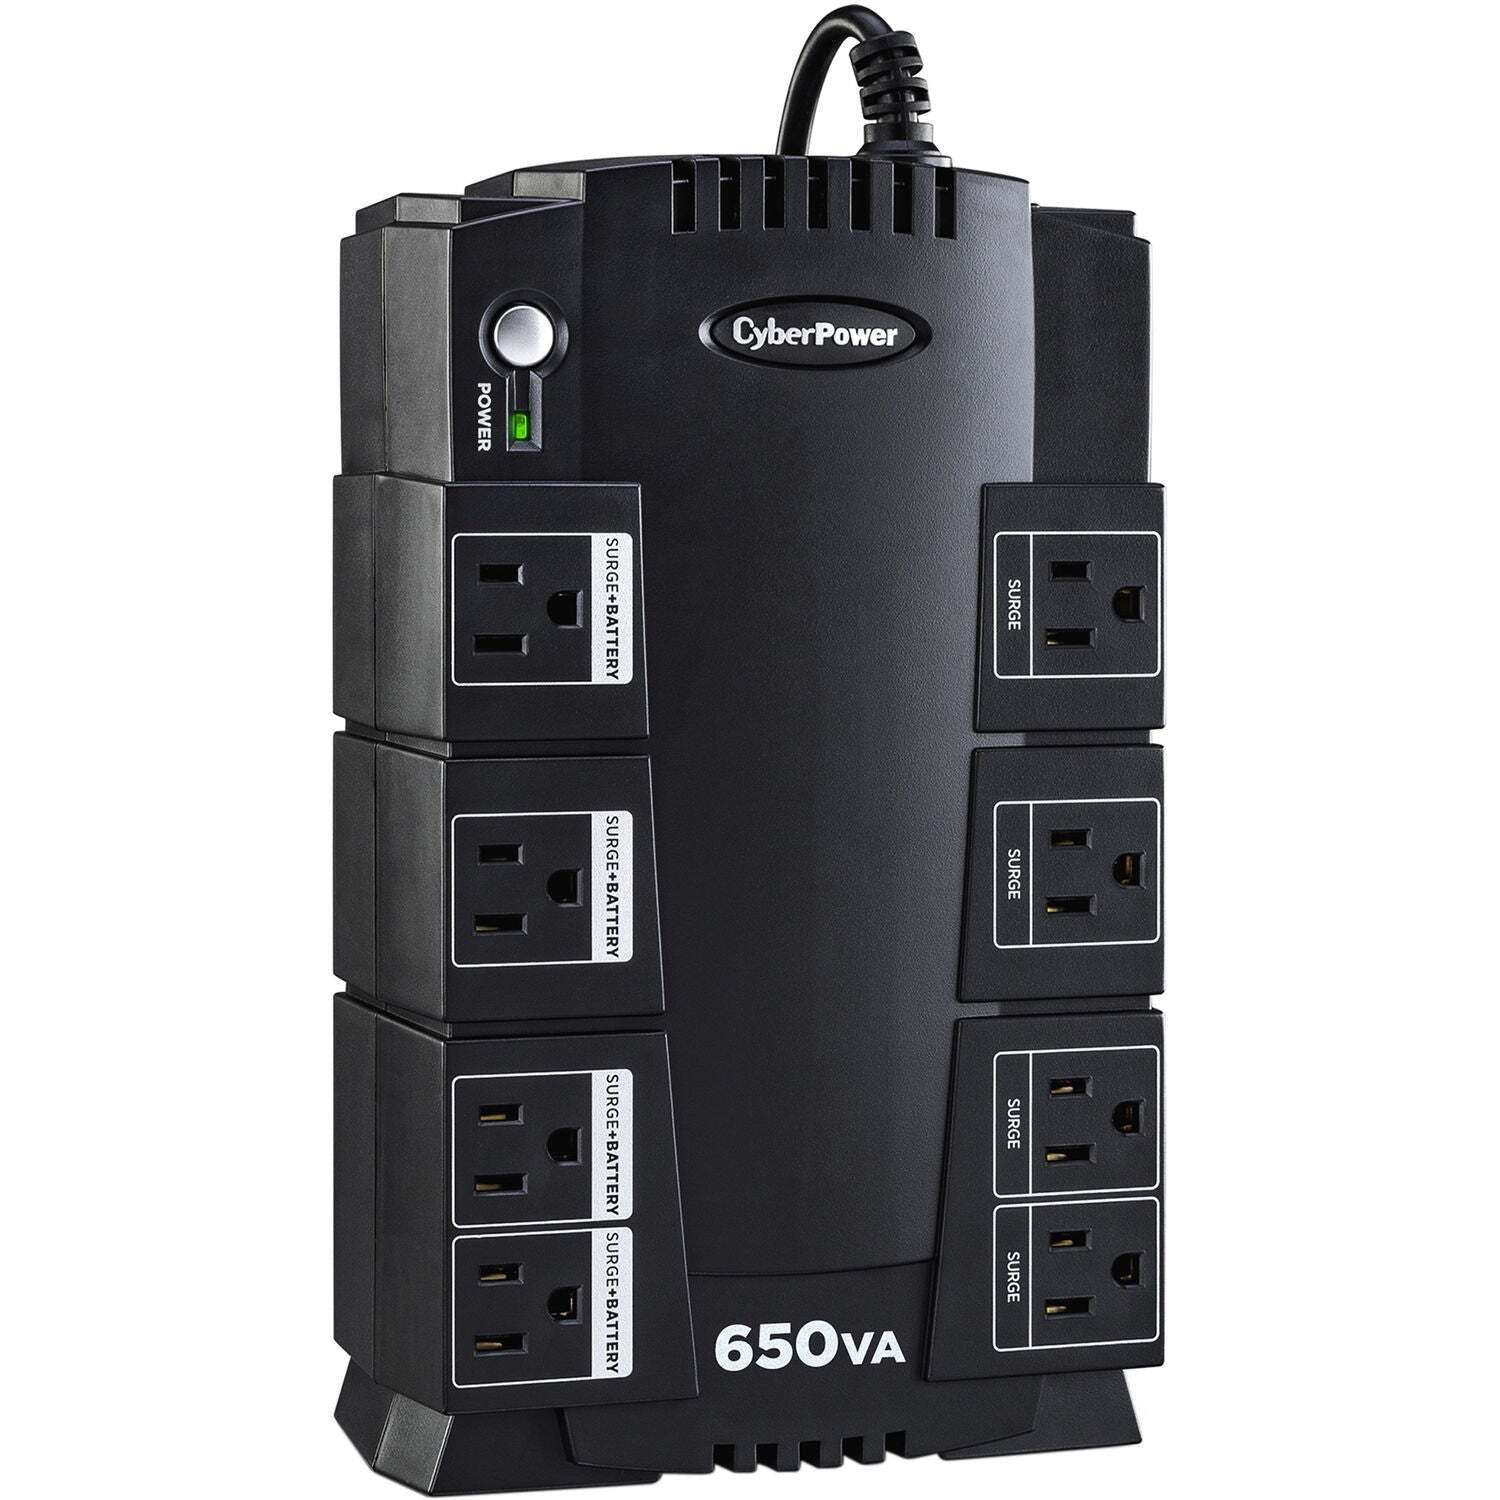 CyberPower SX650G-R 650VA/375W 8-Outlet UPS - Certified Refurbished